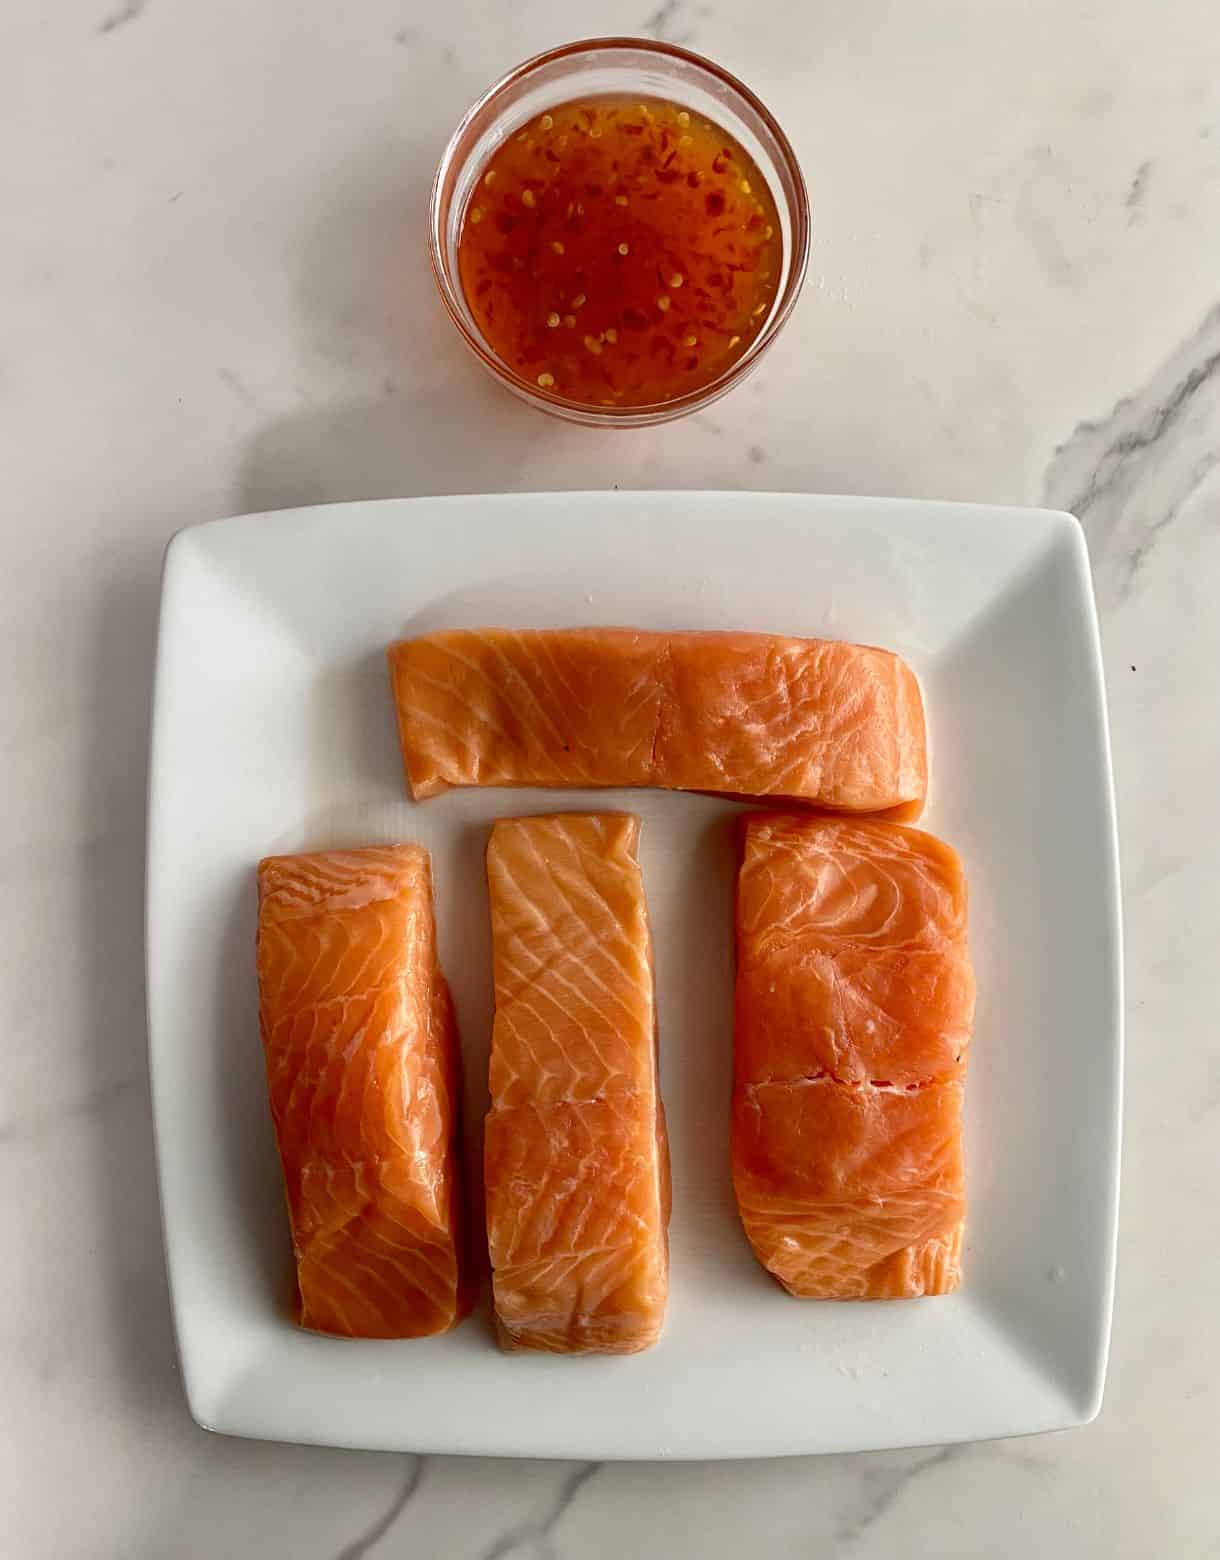 Ingredients for Sweet Chili Salmon. Salmon and sweet chili sauce.